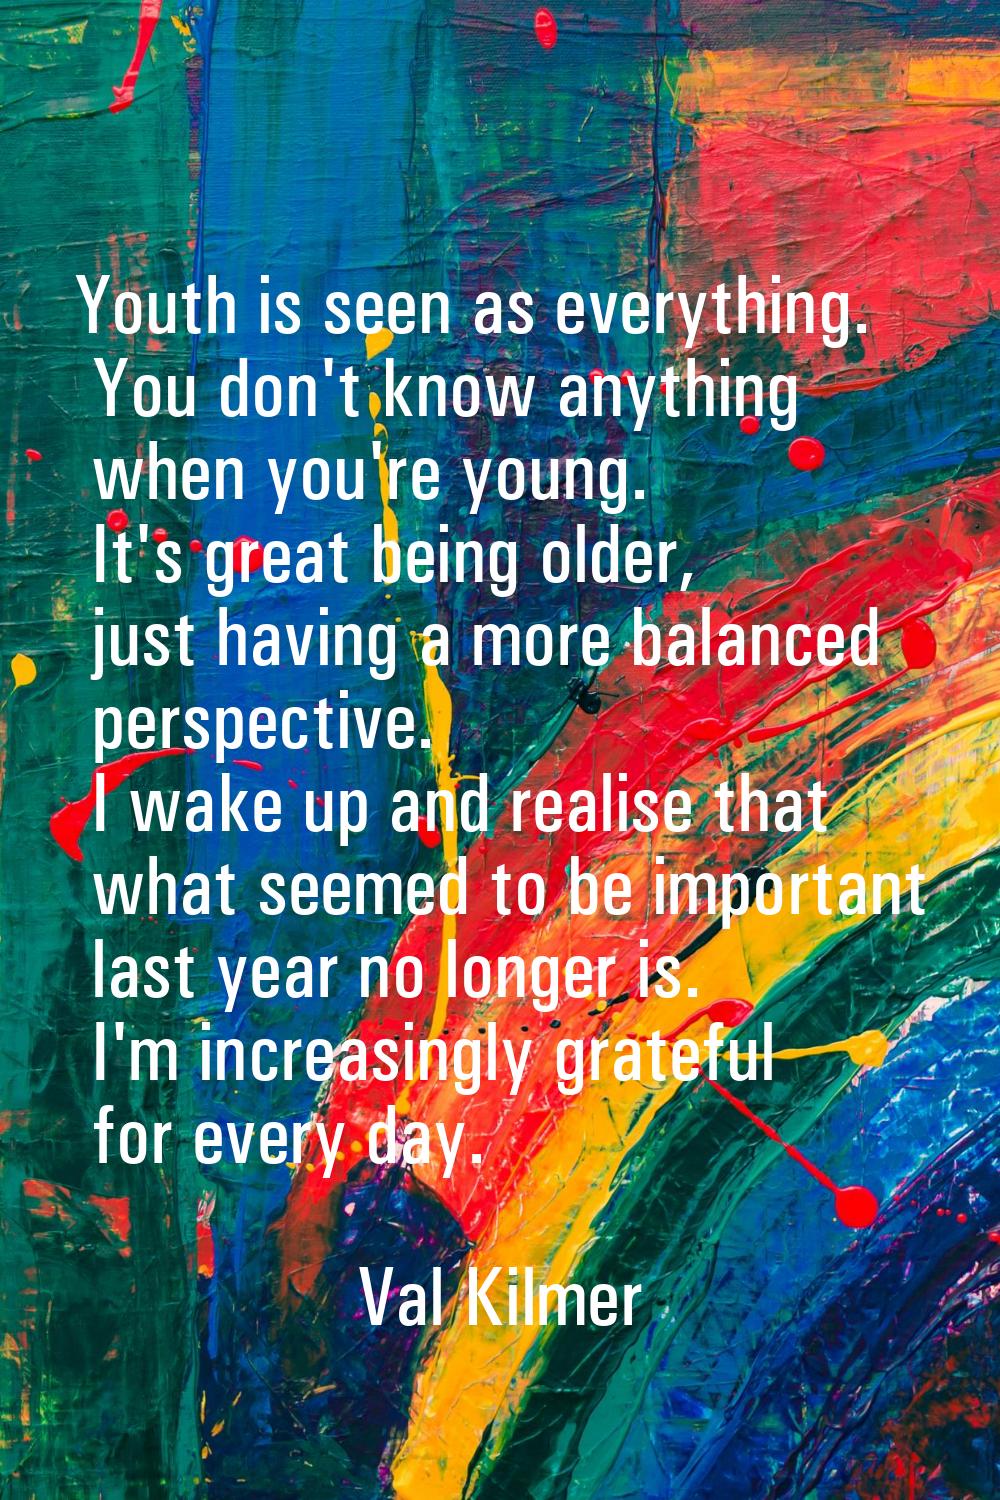 Youth is seen as everything. You don't know anything when you're young. It's great being older, jus